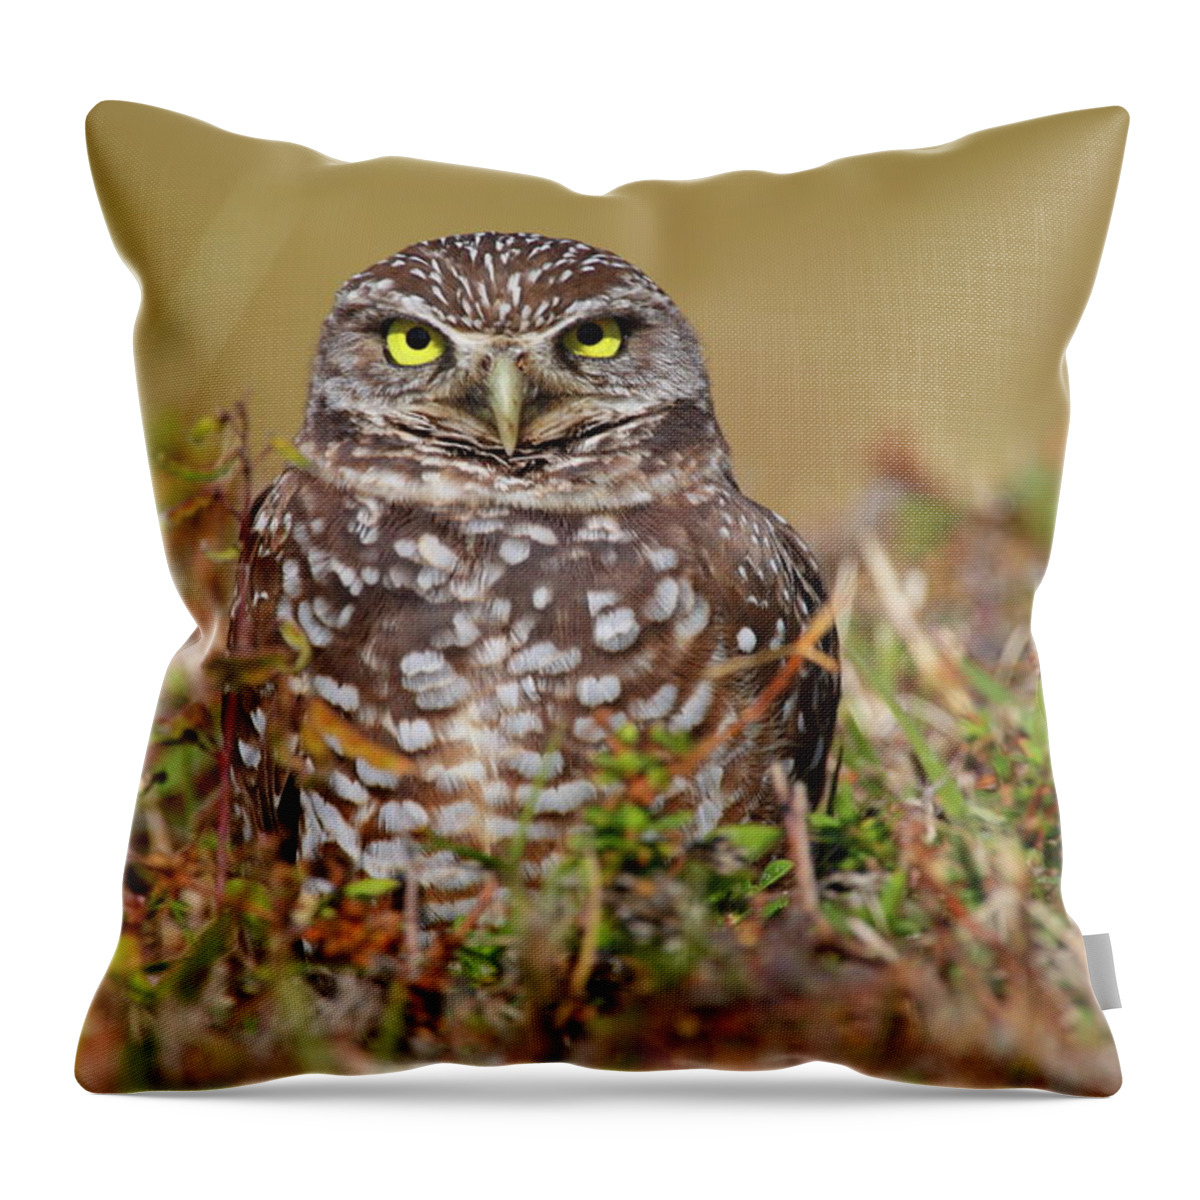 Owl Throw Pillow featuring the photograph Burrowing Owl #1 by Bruce J Robinson